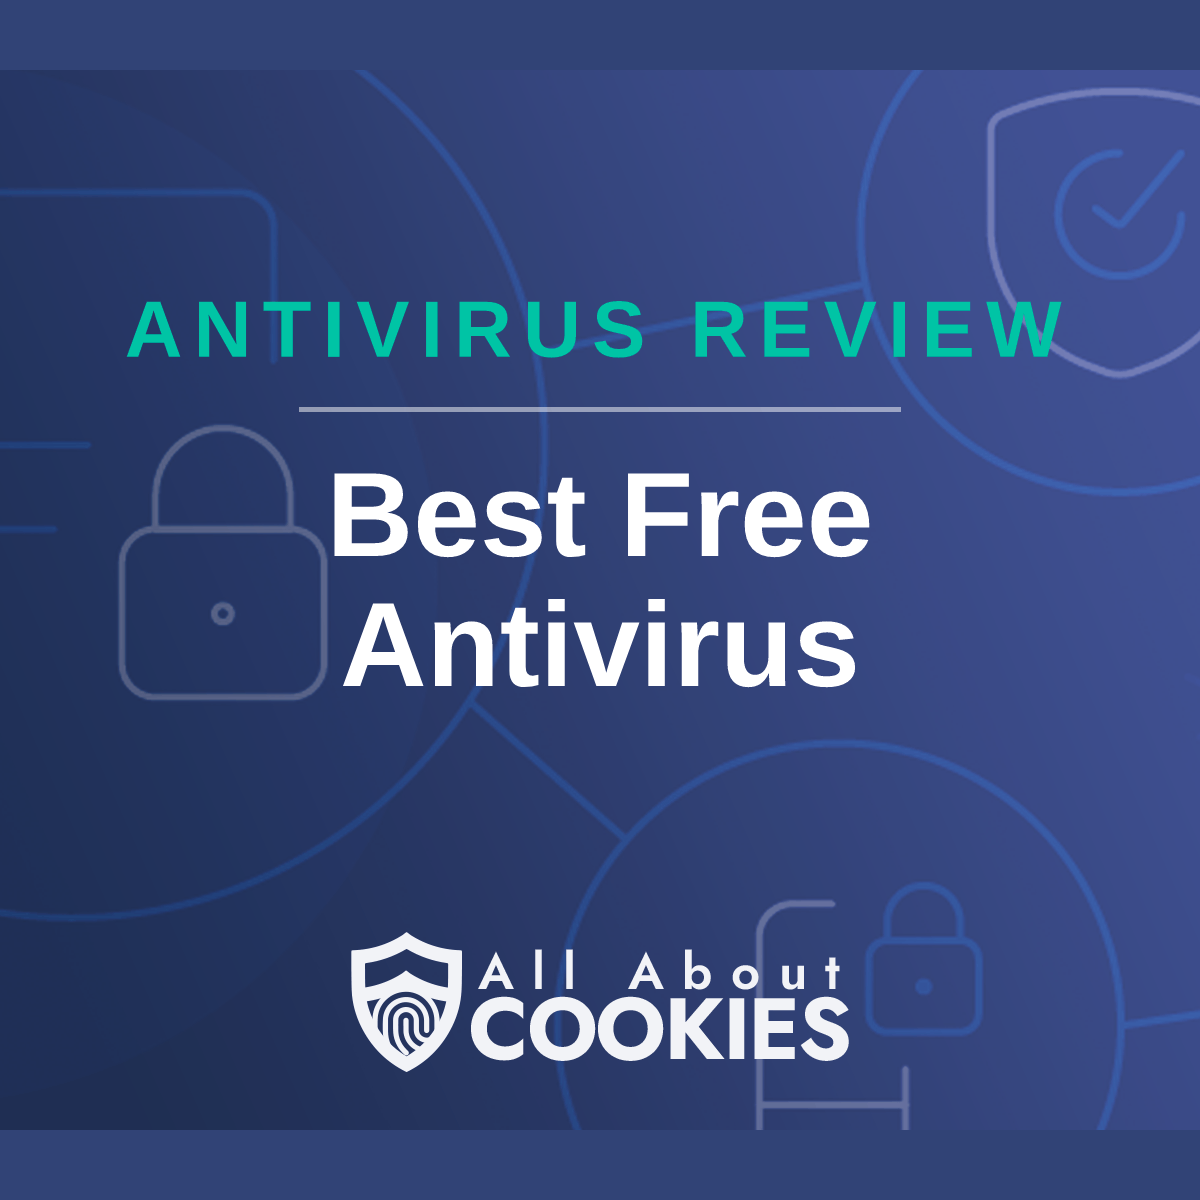 A blue background with images of locks and shields with the text &quot;Best Free Antivirus&quot; and the All About Cookies logo. 